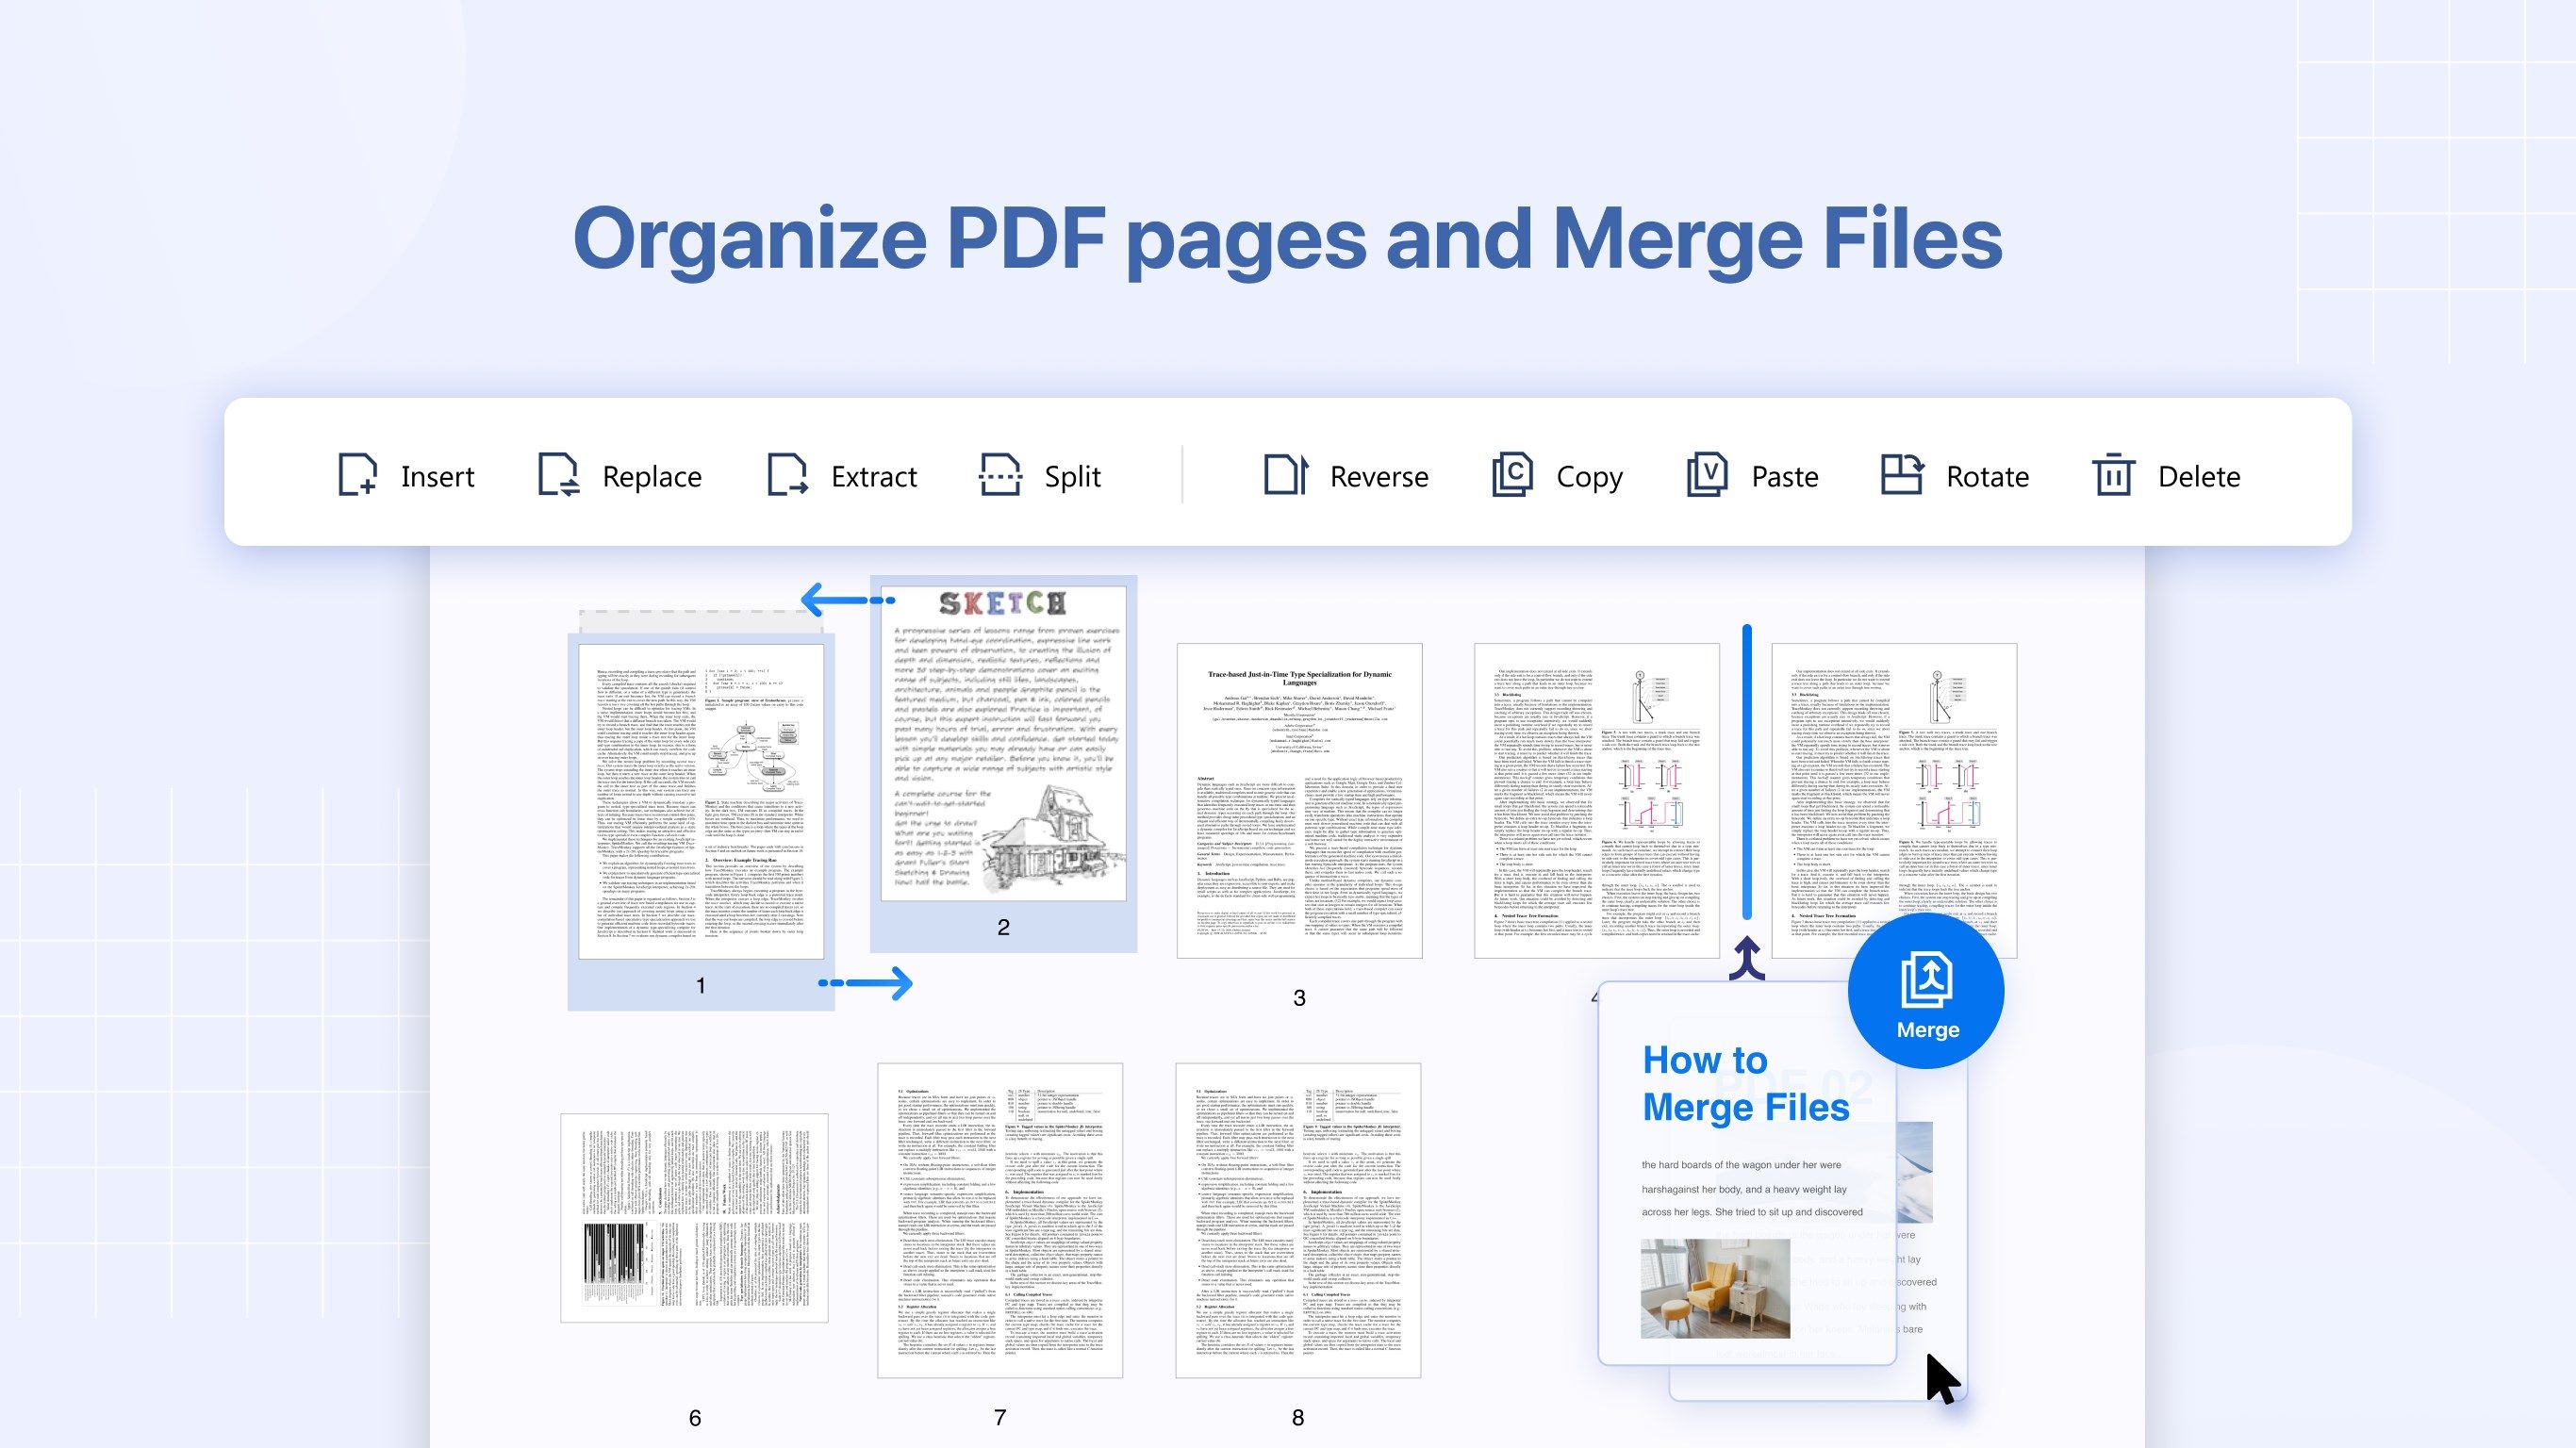 Organize PDF pages and Merge Files